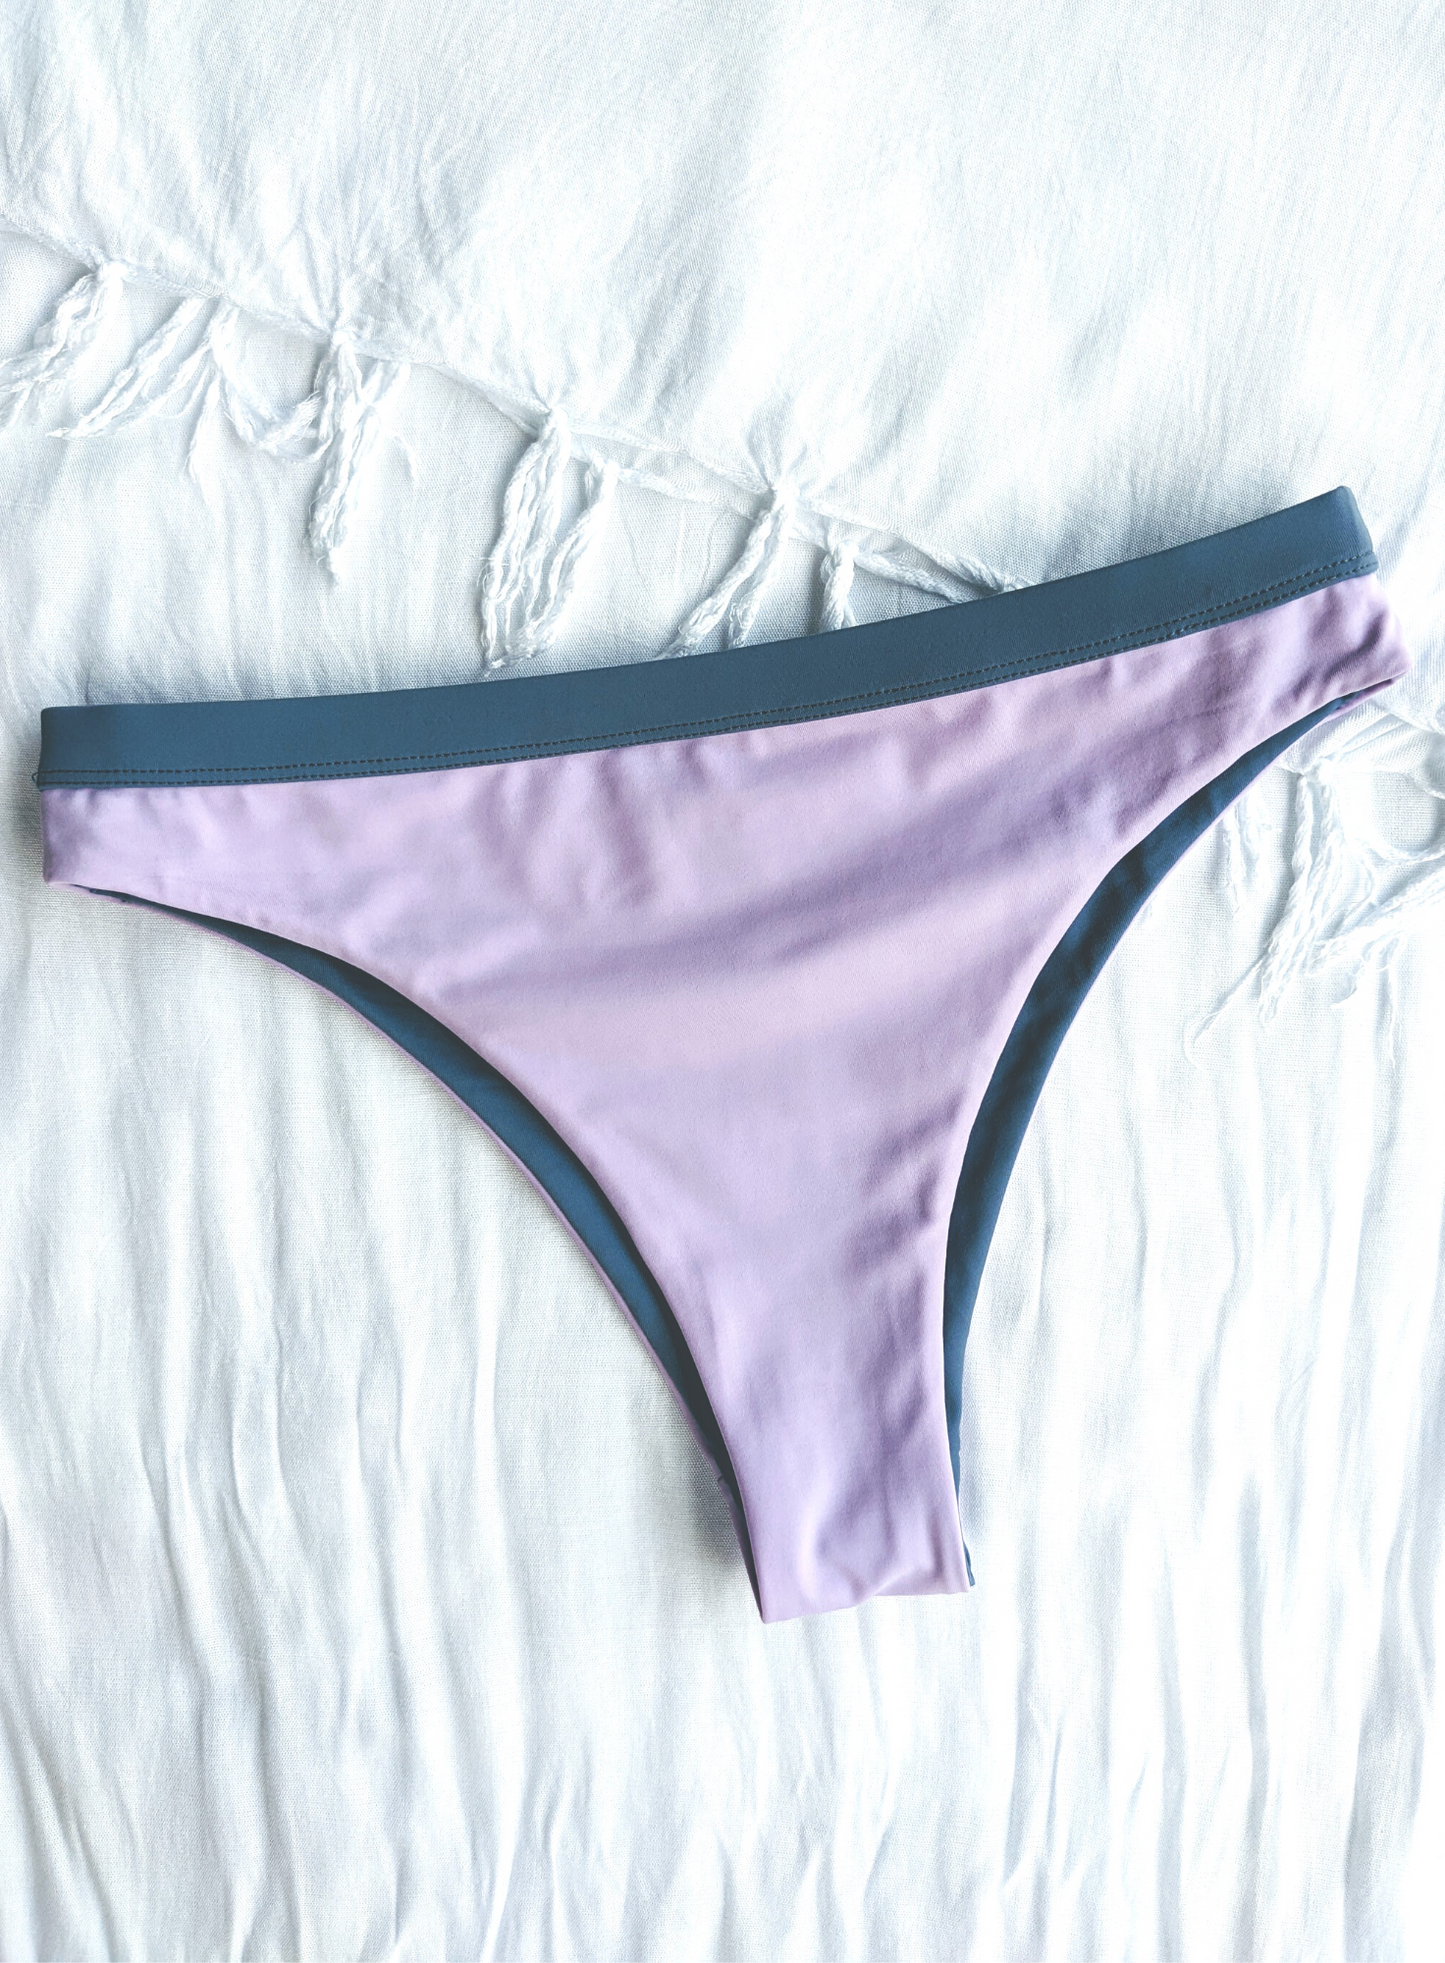 Reversible Blue and Lilac Medium High Cut Bikini Bottom Made From Eco Friendly Recycled Regenerated Fabric Lilac Front Flat Lay View